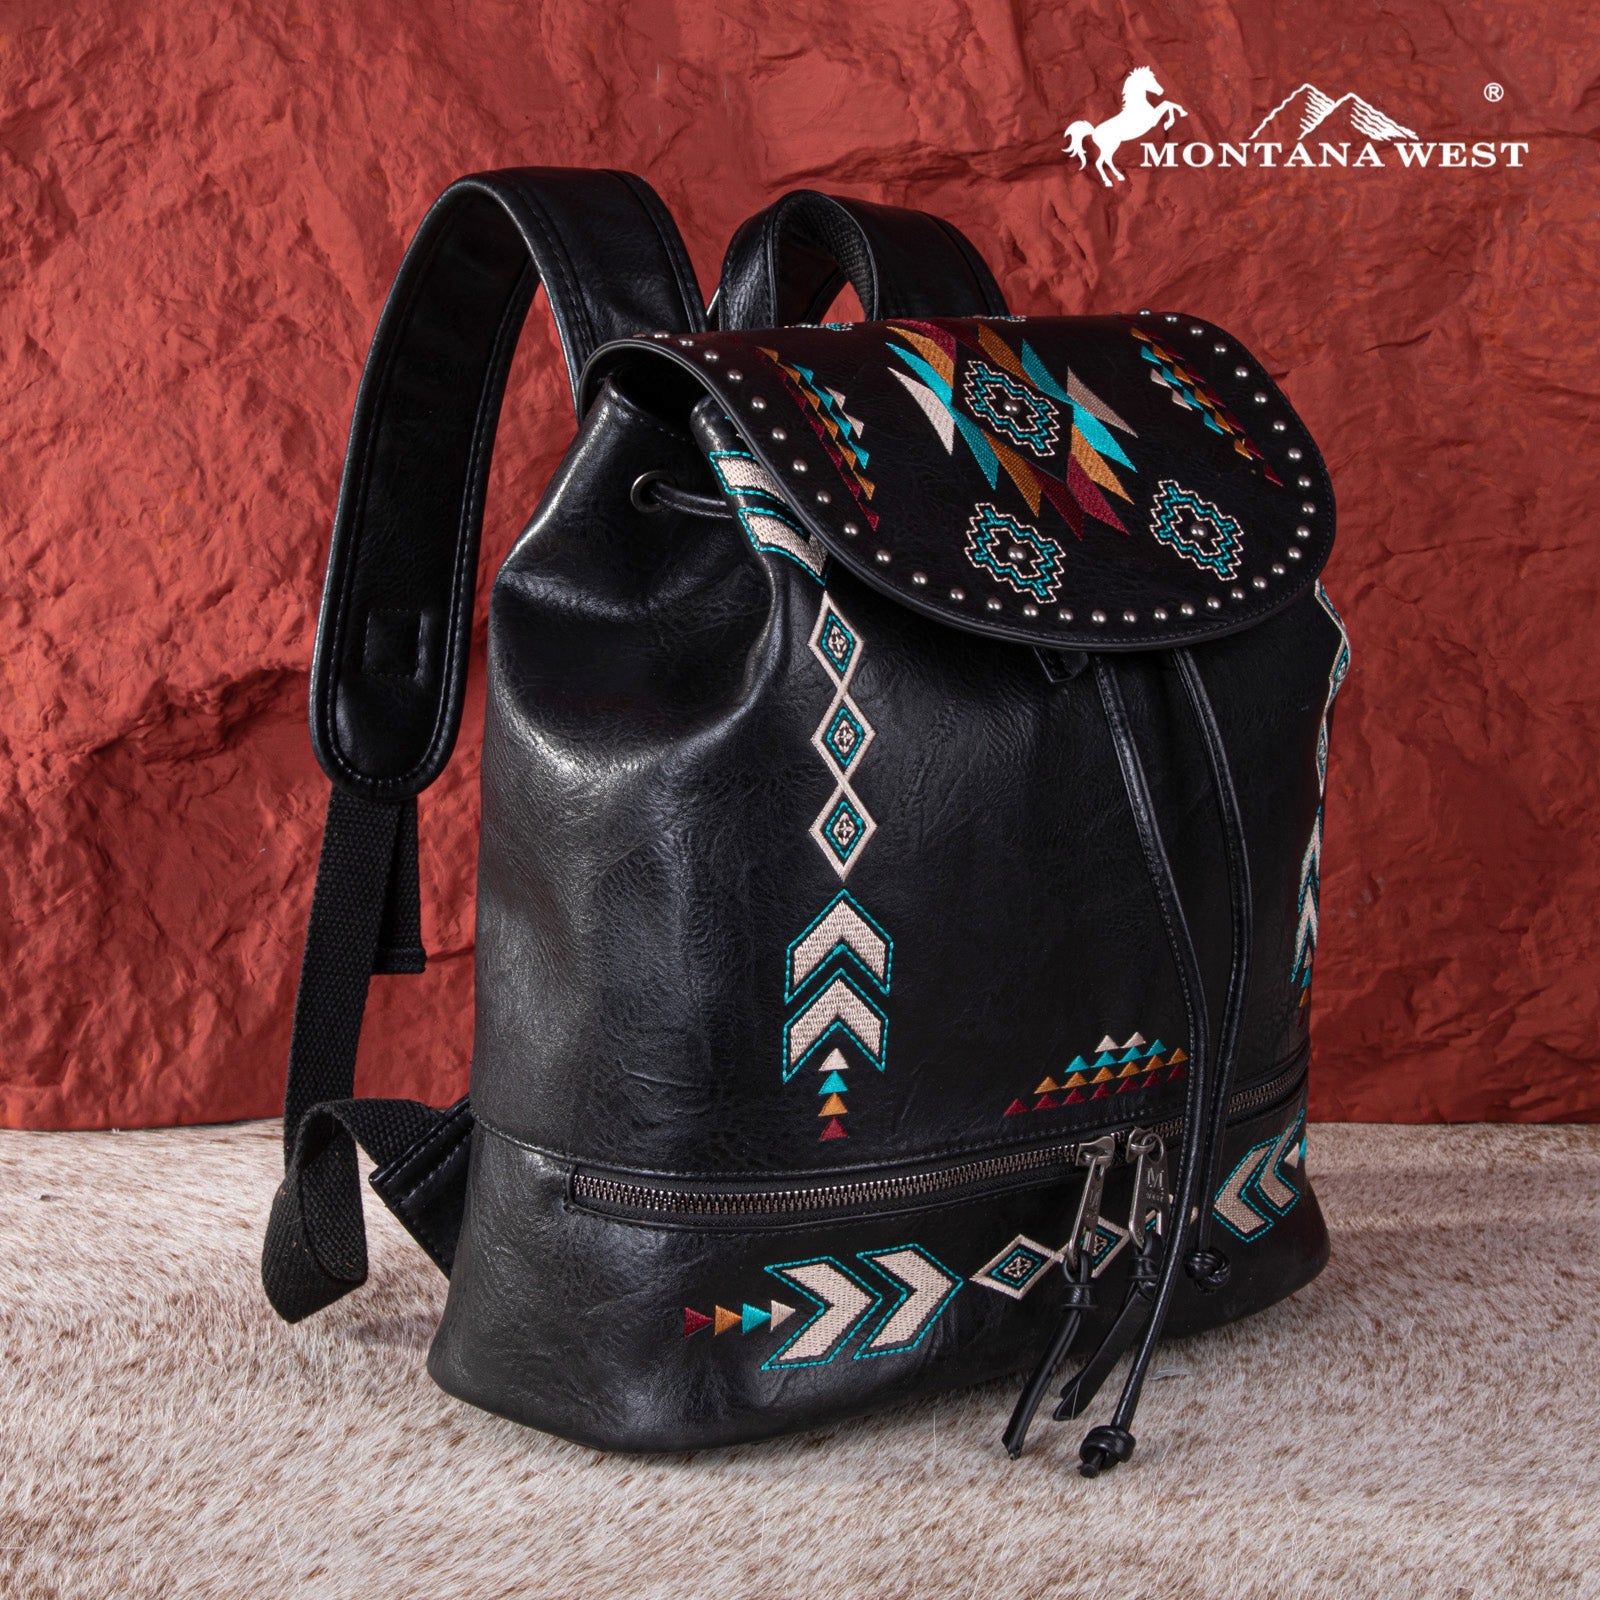 Montana West Aztec Embroidered Collection Backpack - Cowgirl Wear